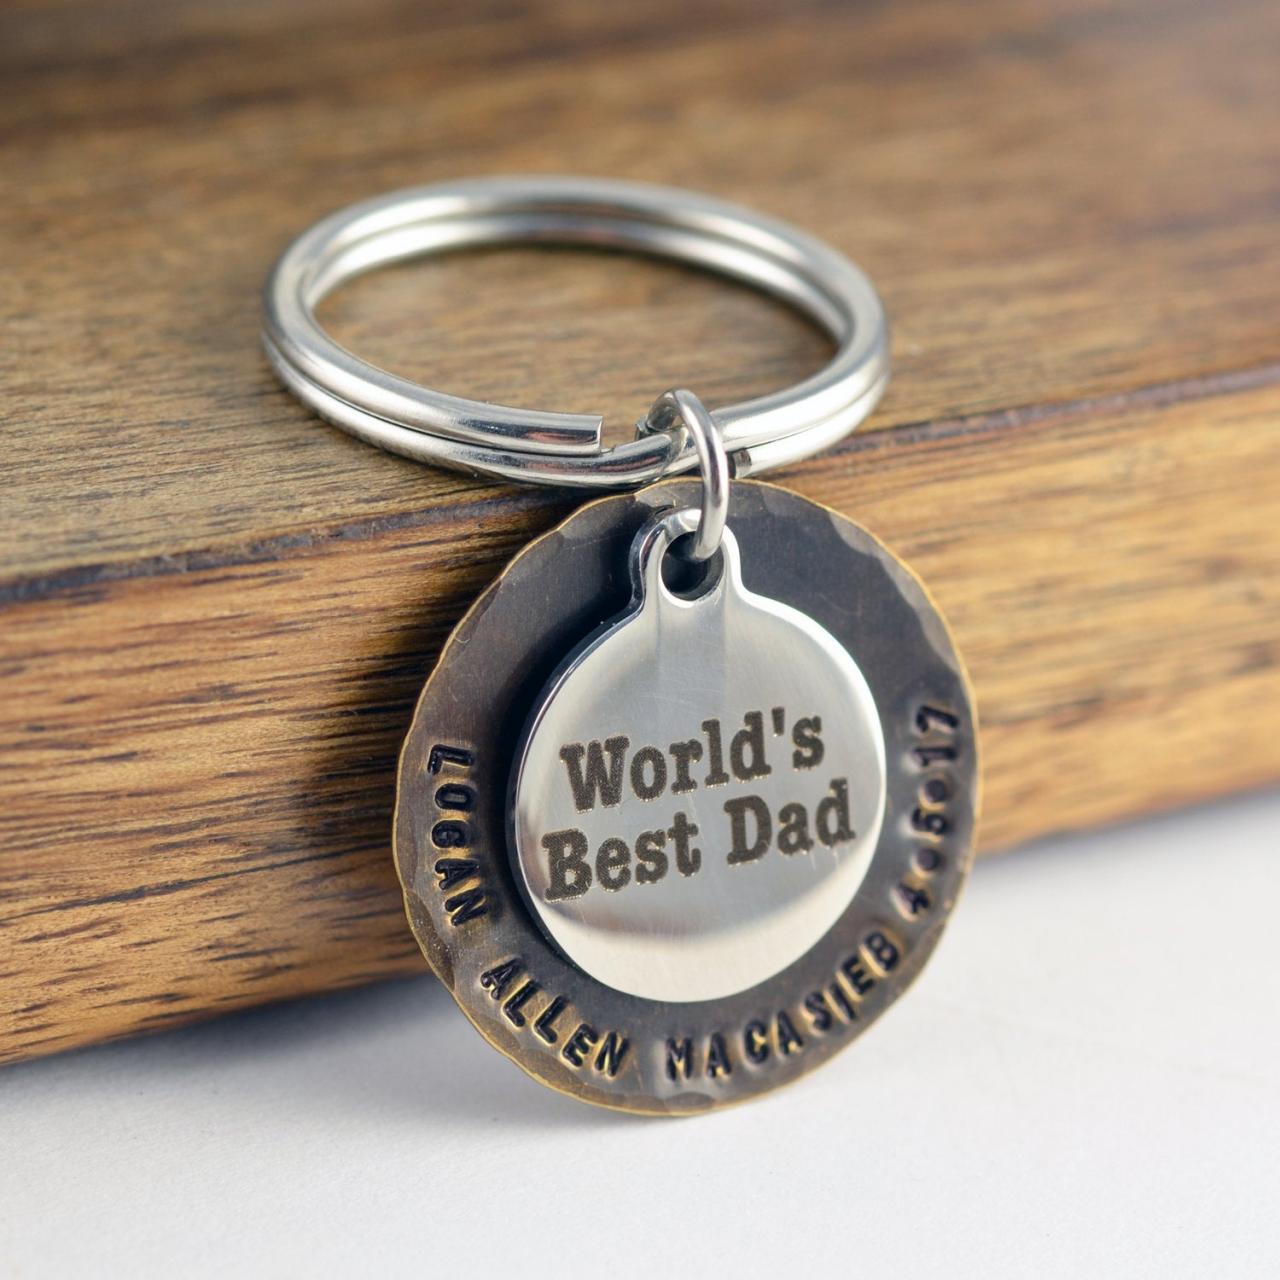 Father's Day Gift, Birthday Gift For Dad, Personalized Keychain For Dad, Mens Keychain, Dad Gift, Worlds Dad, Engraved Keychain